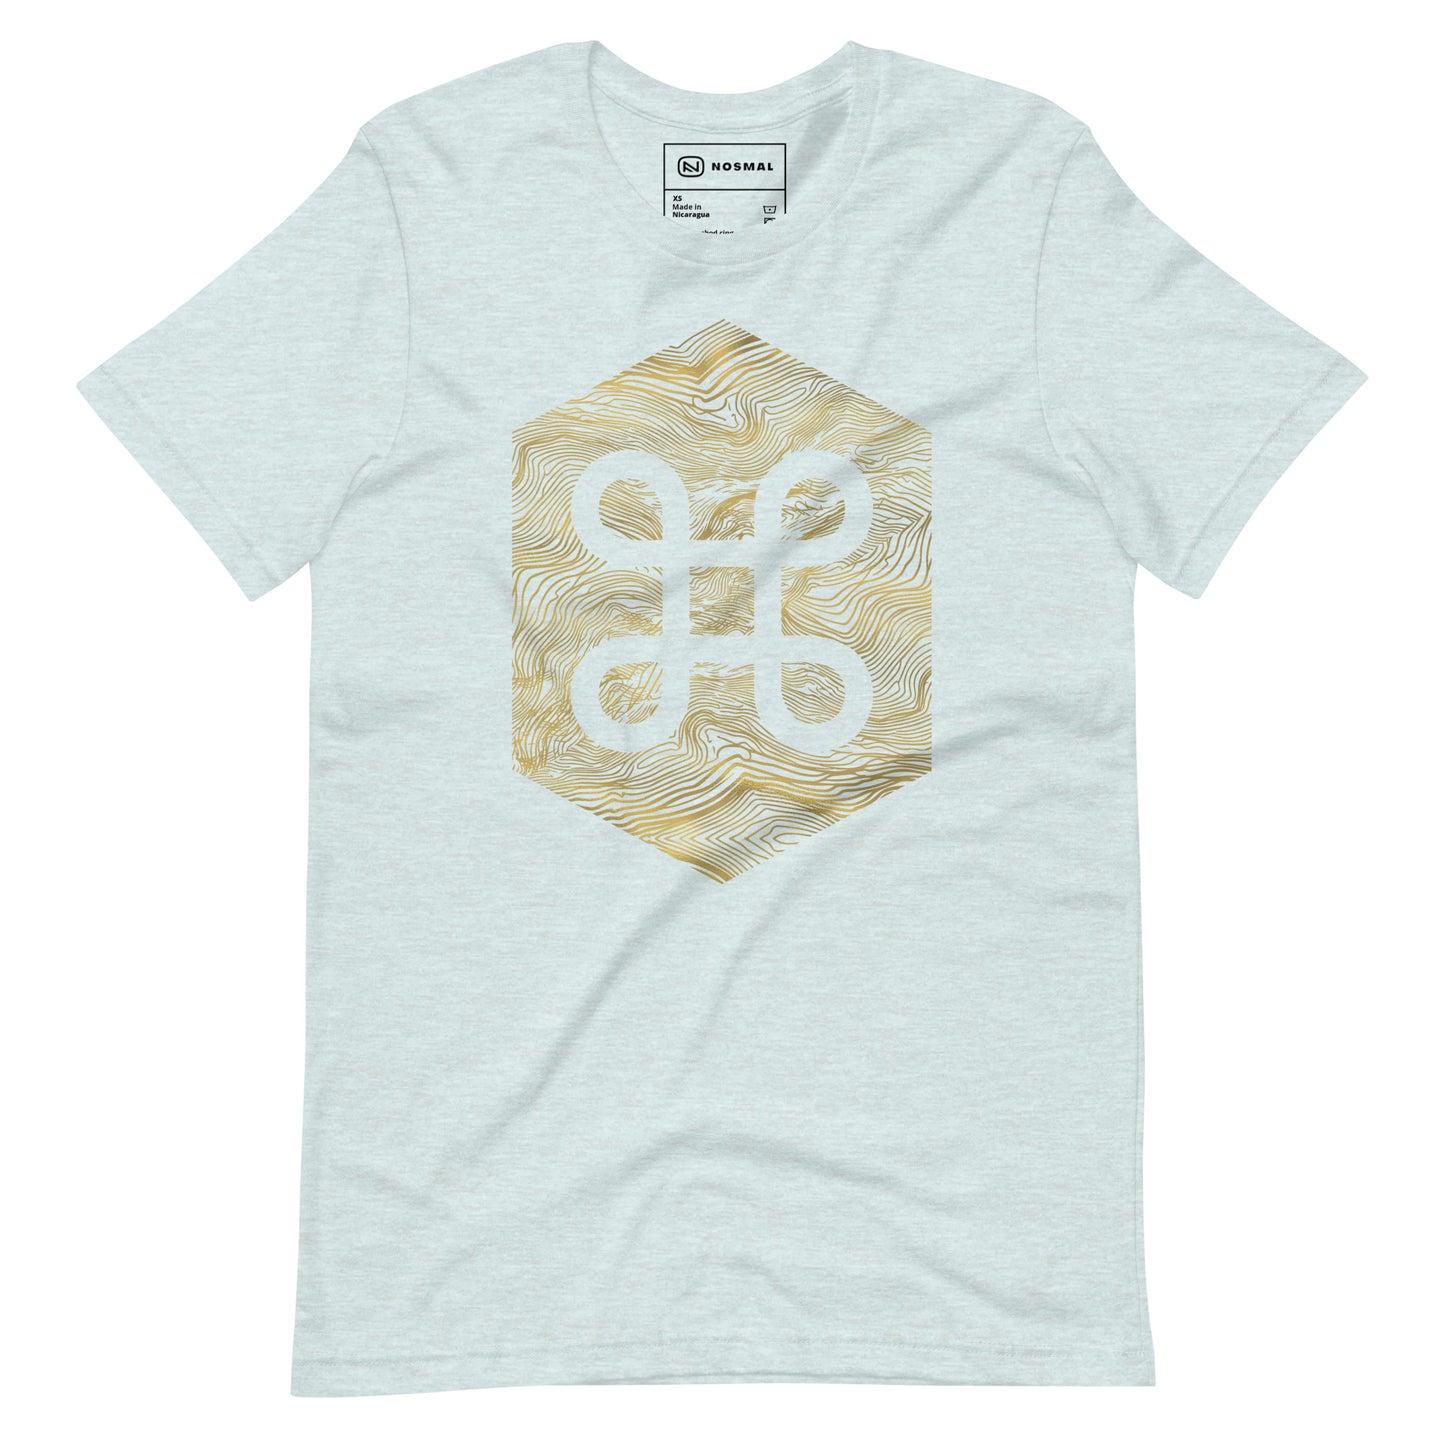 Straight on view of the commander gold design on heather prism ice blue unisex t-shirt.